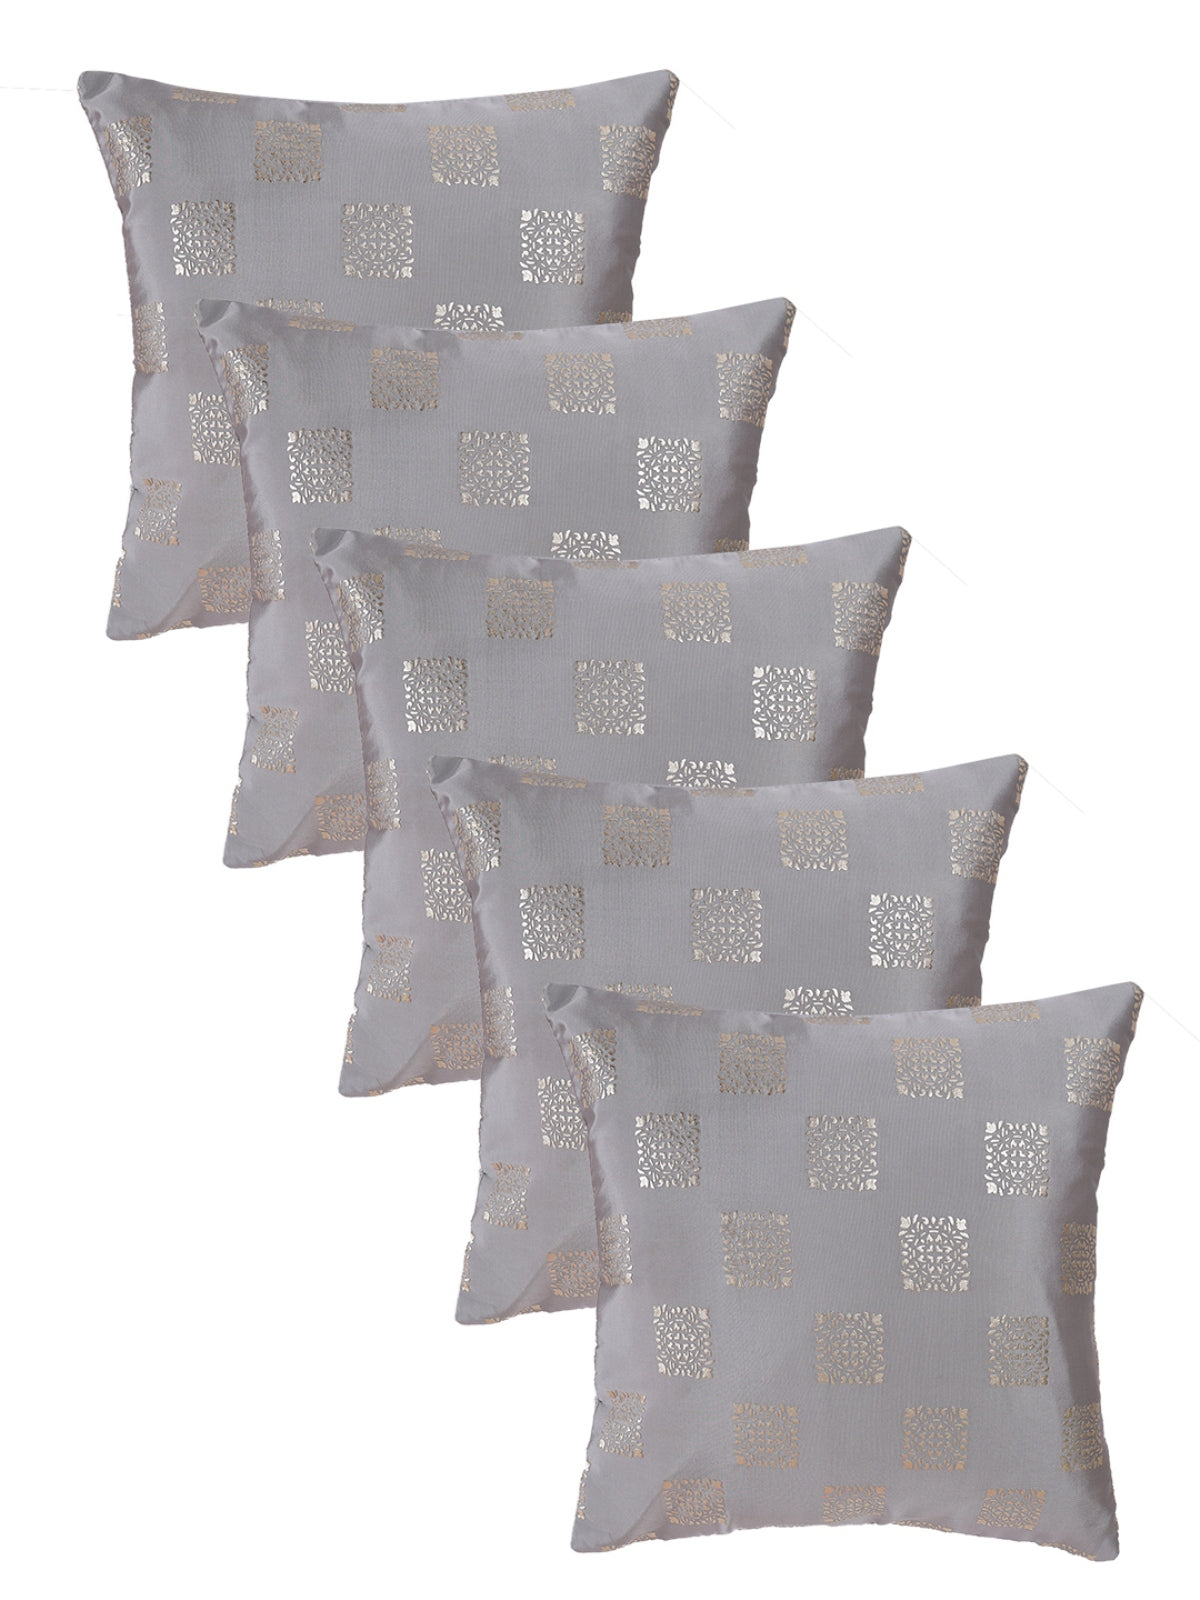 Polyester Ethnic Motifs Design Cushion Covers 16x16 Inches, Set of 5 - Silver